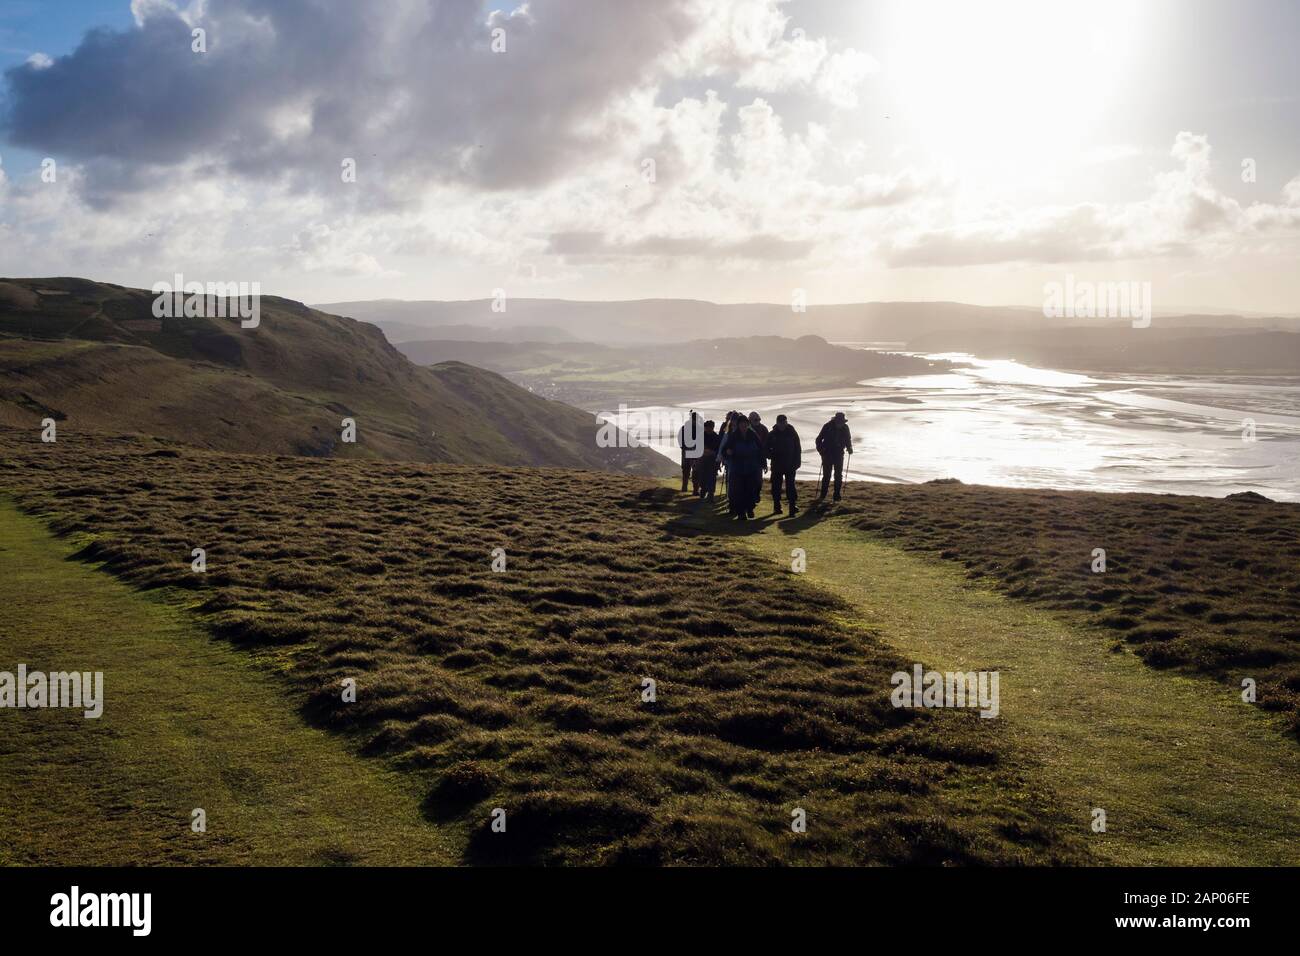 Hikers hiking up the Great Orme path backlit by winter sun. Llandudno, Conwy, north Wales, UK, Britain Stock Photo